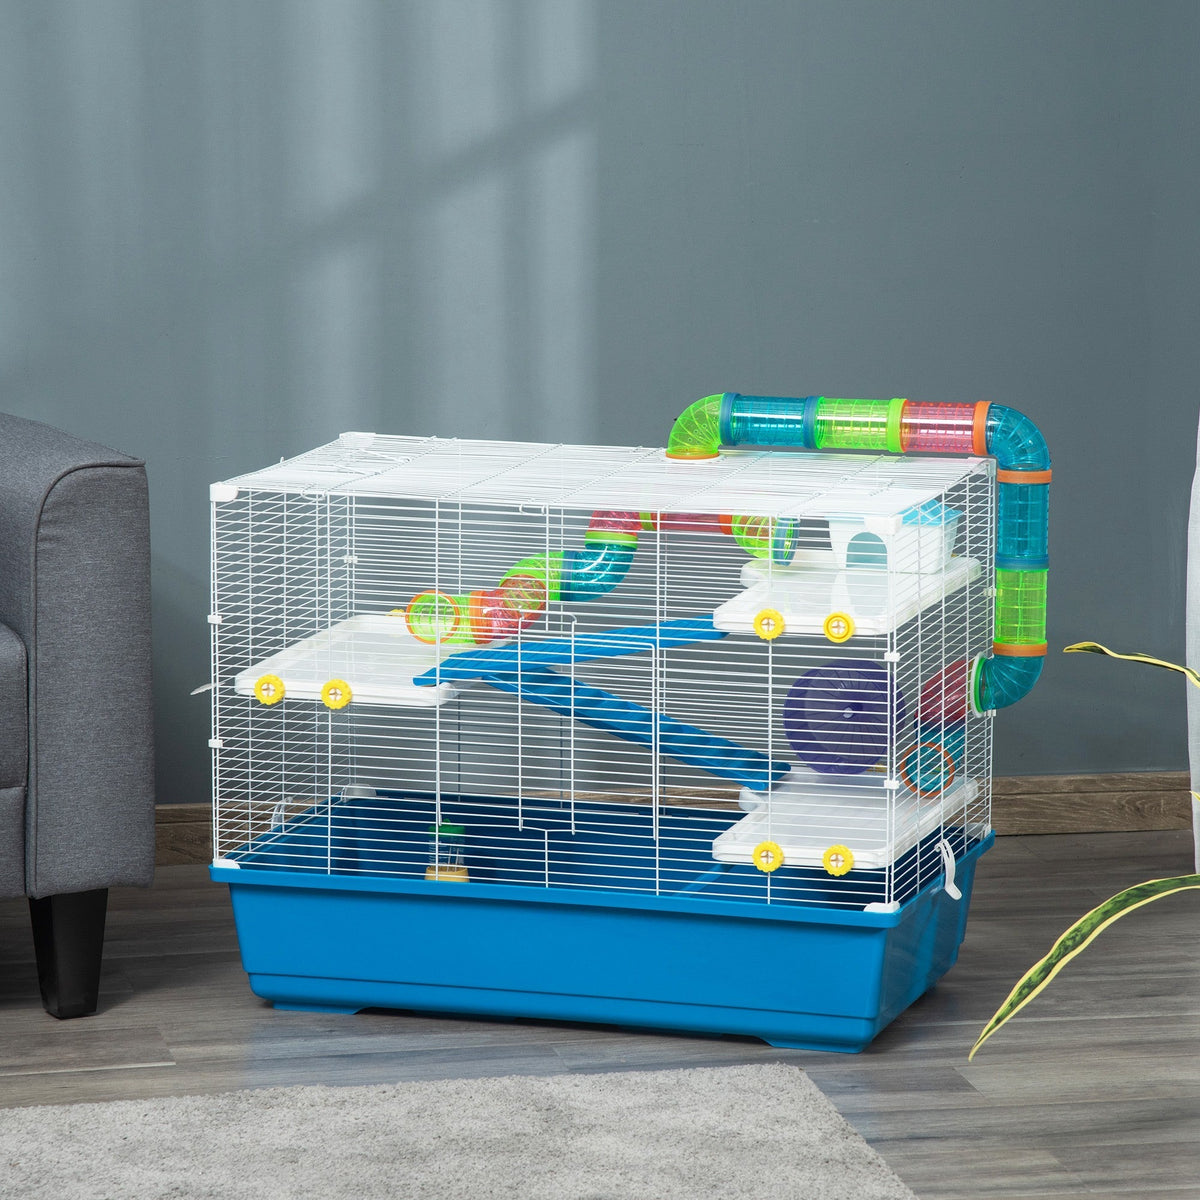 Multilevel Hamster Cage with Tubes, Wheel, Ramps - Blue, PawHut,